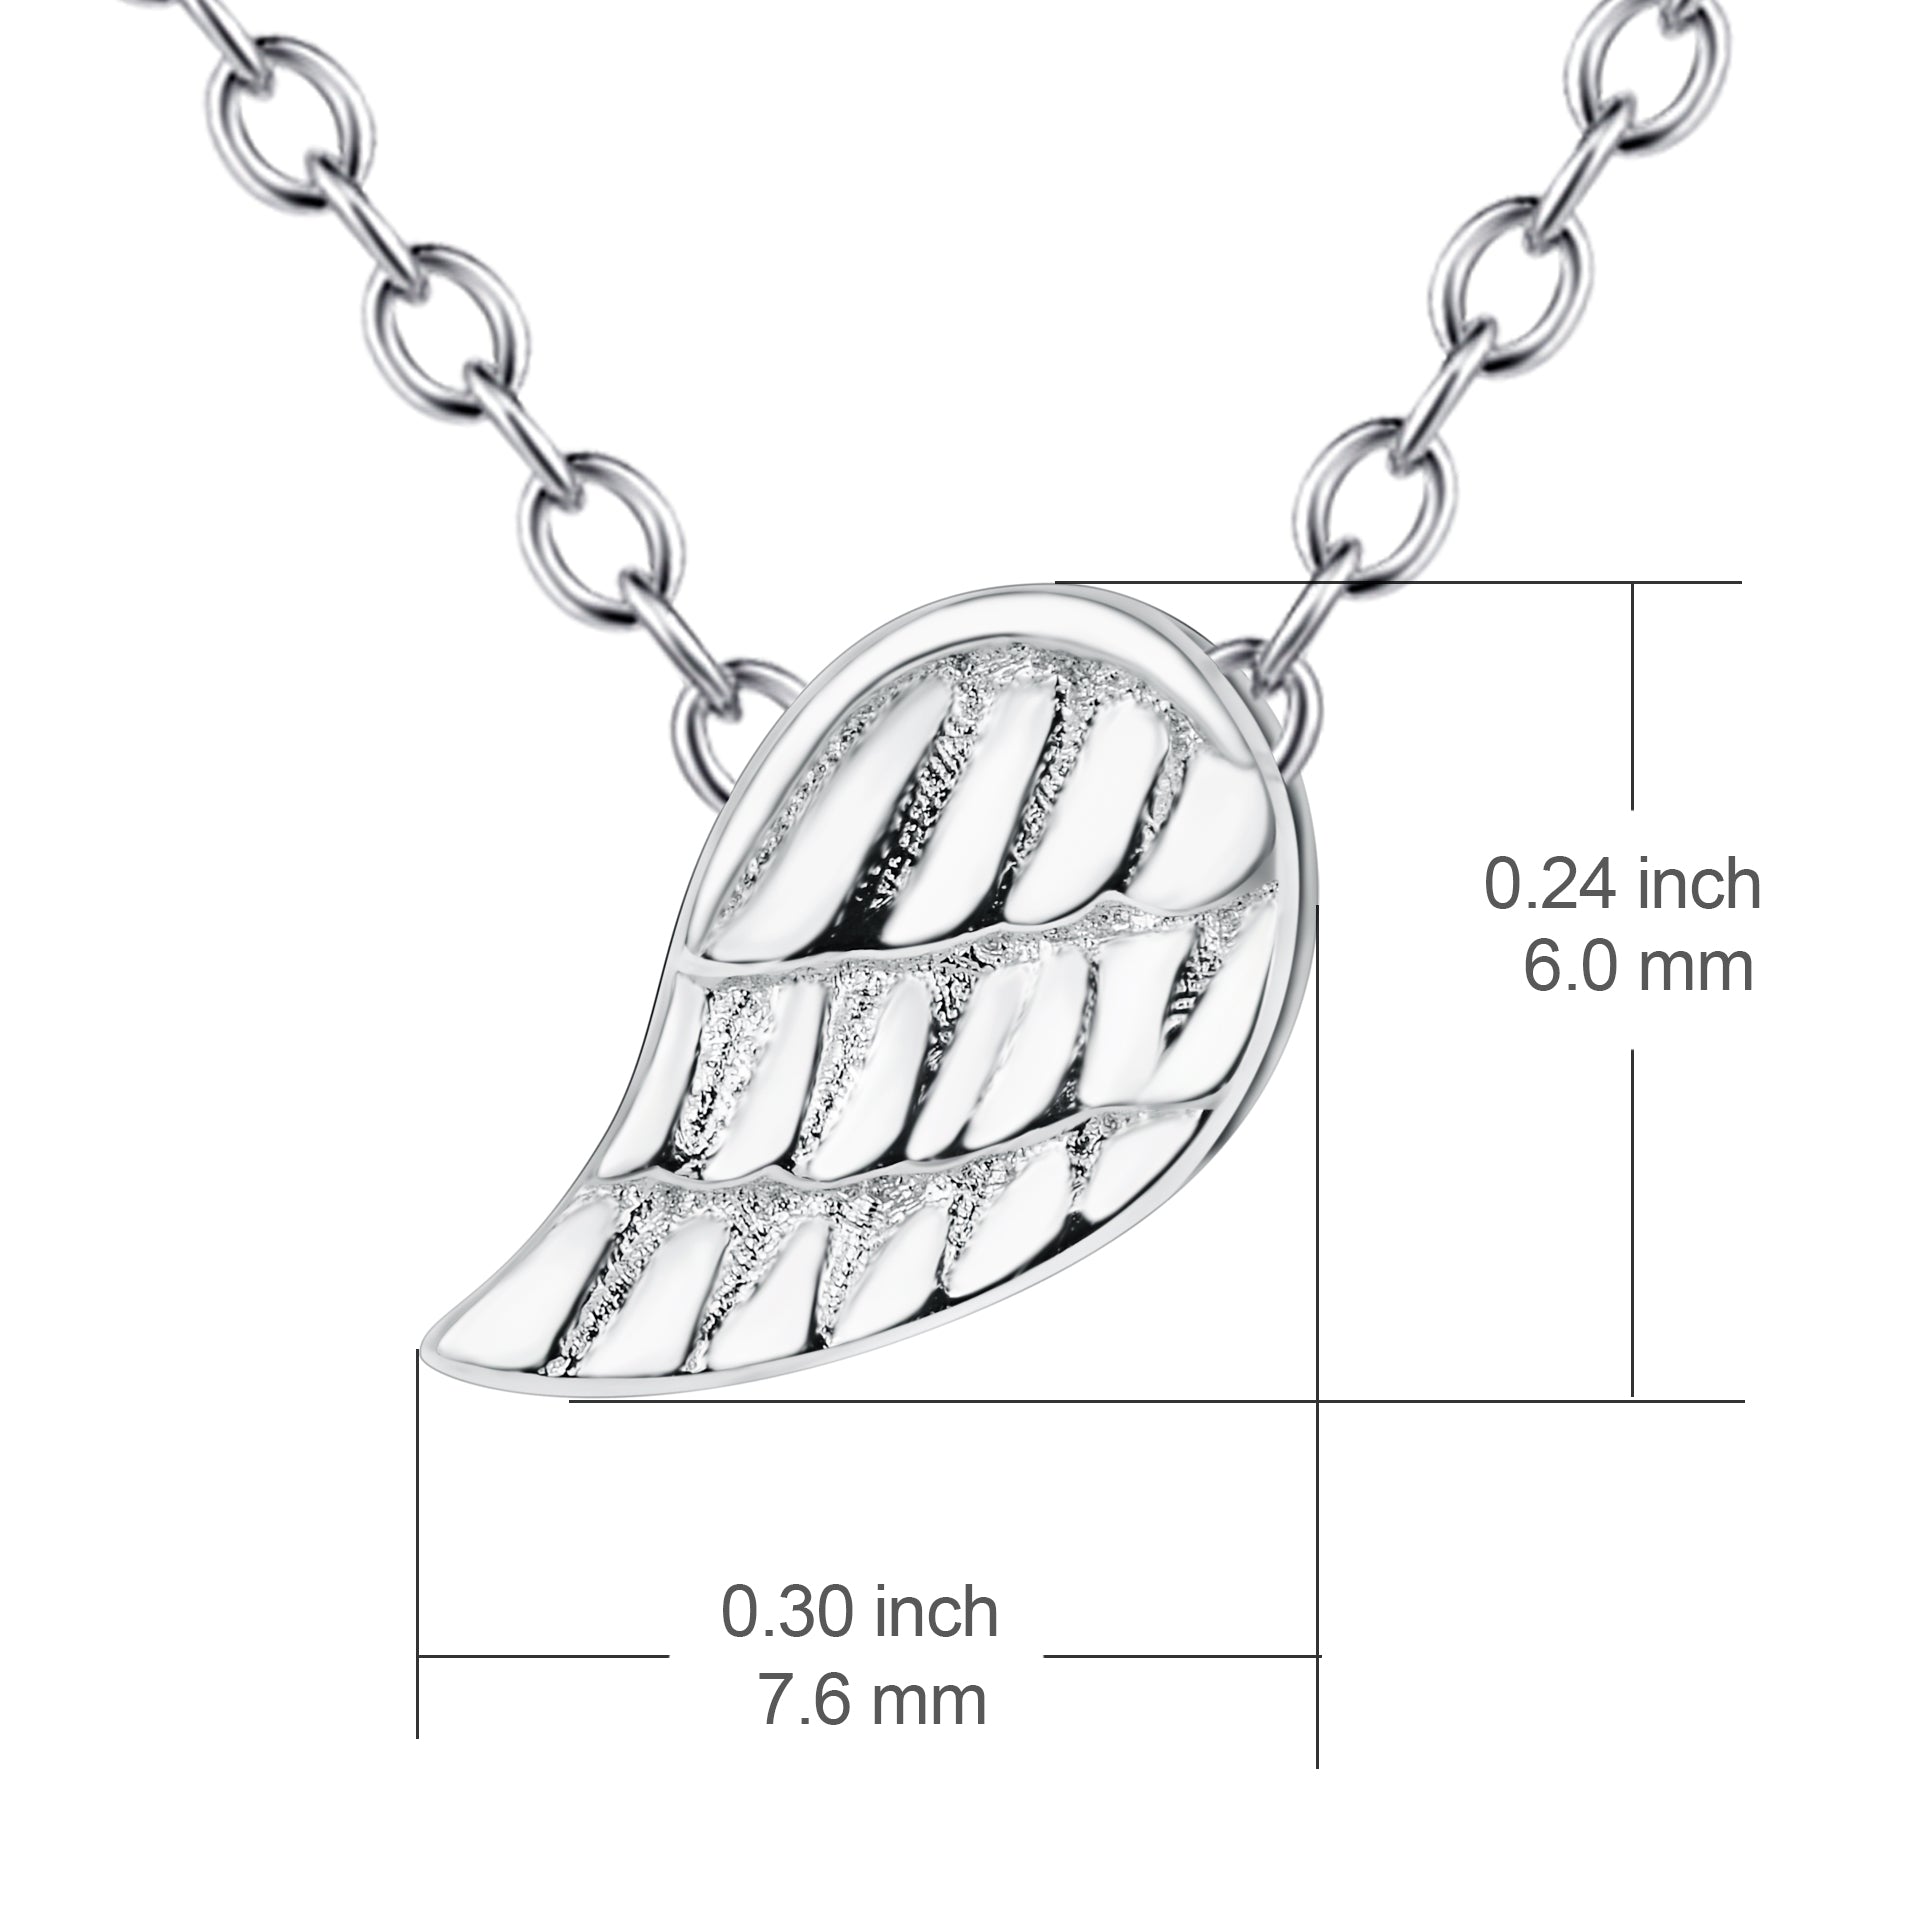 Little Wings Necklace 18 Inch Cable Chain Silver Pendant Necklace